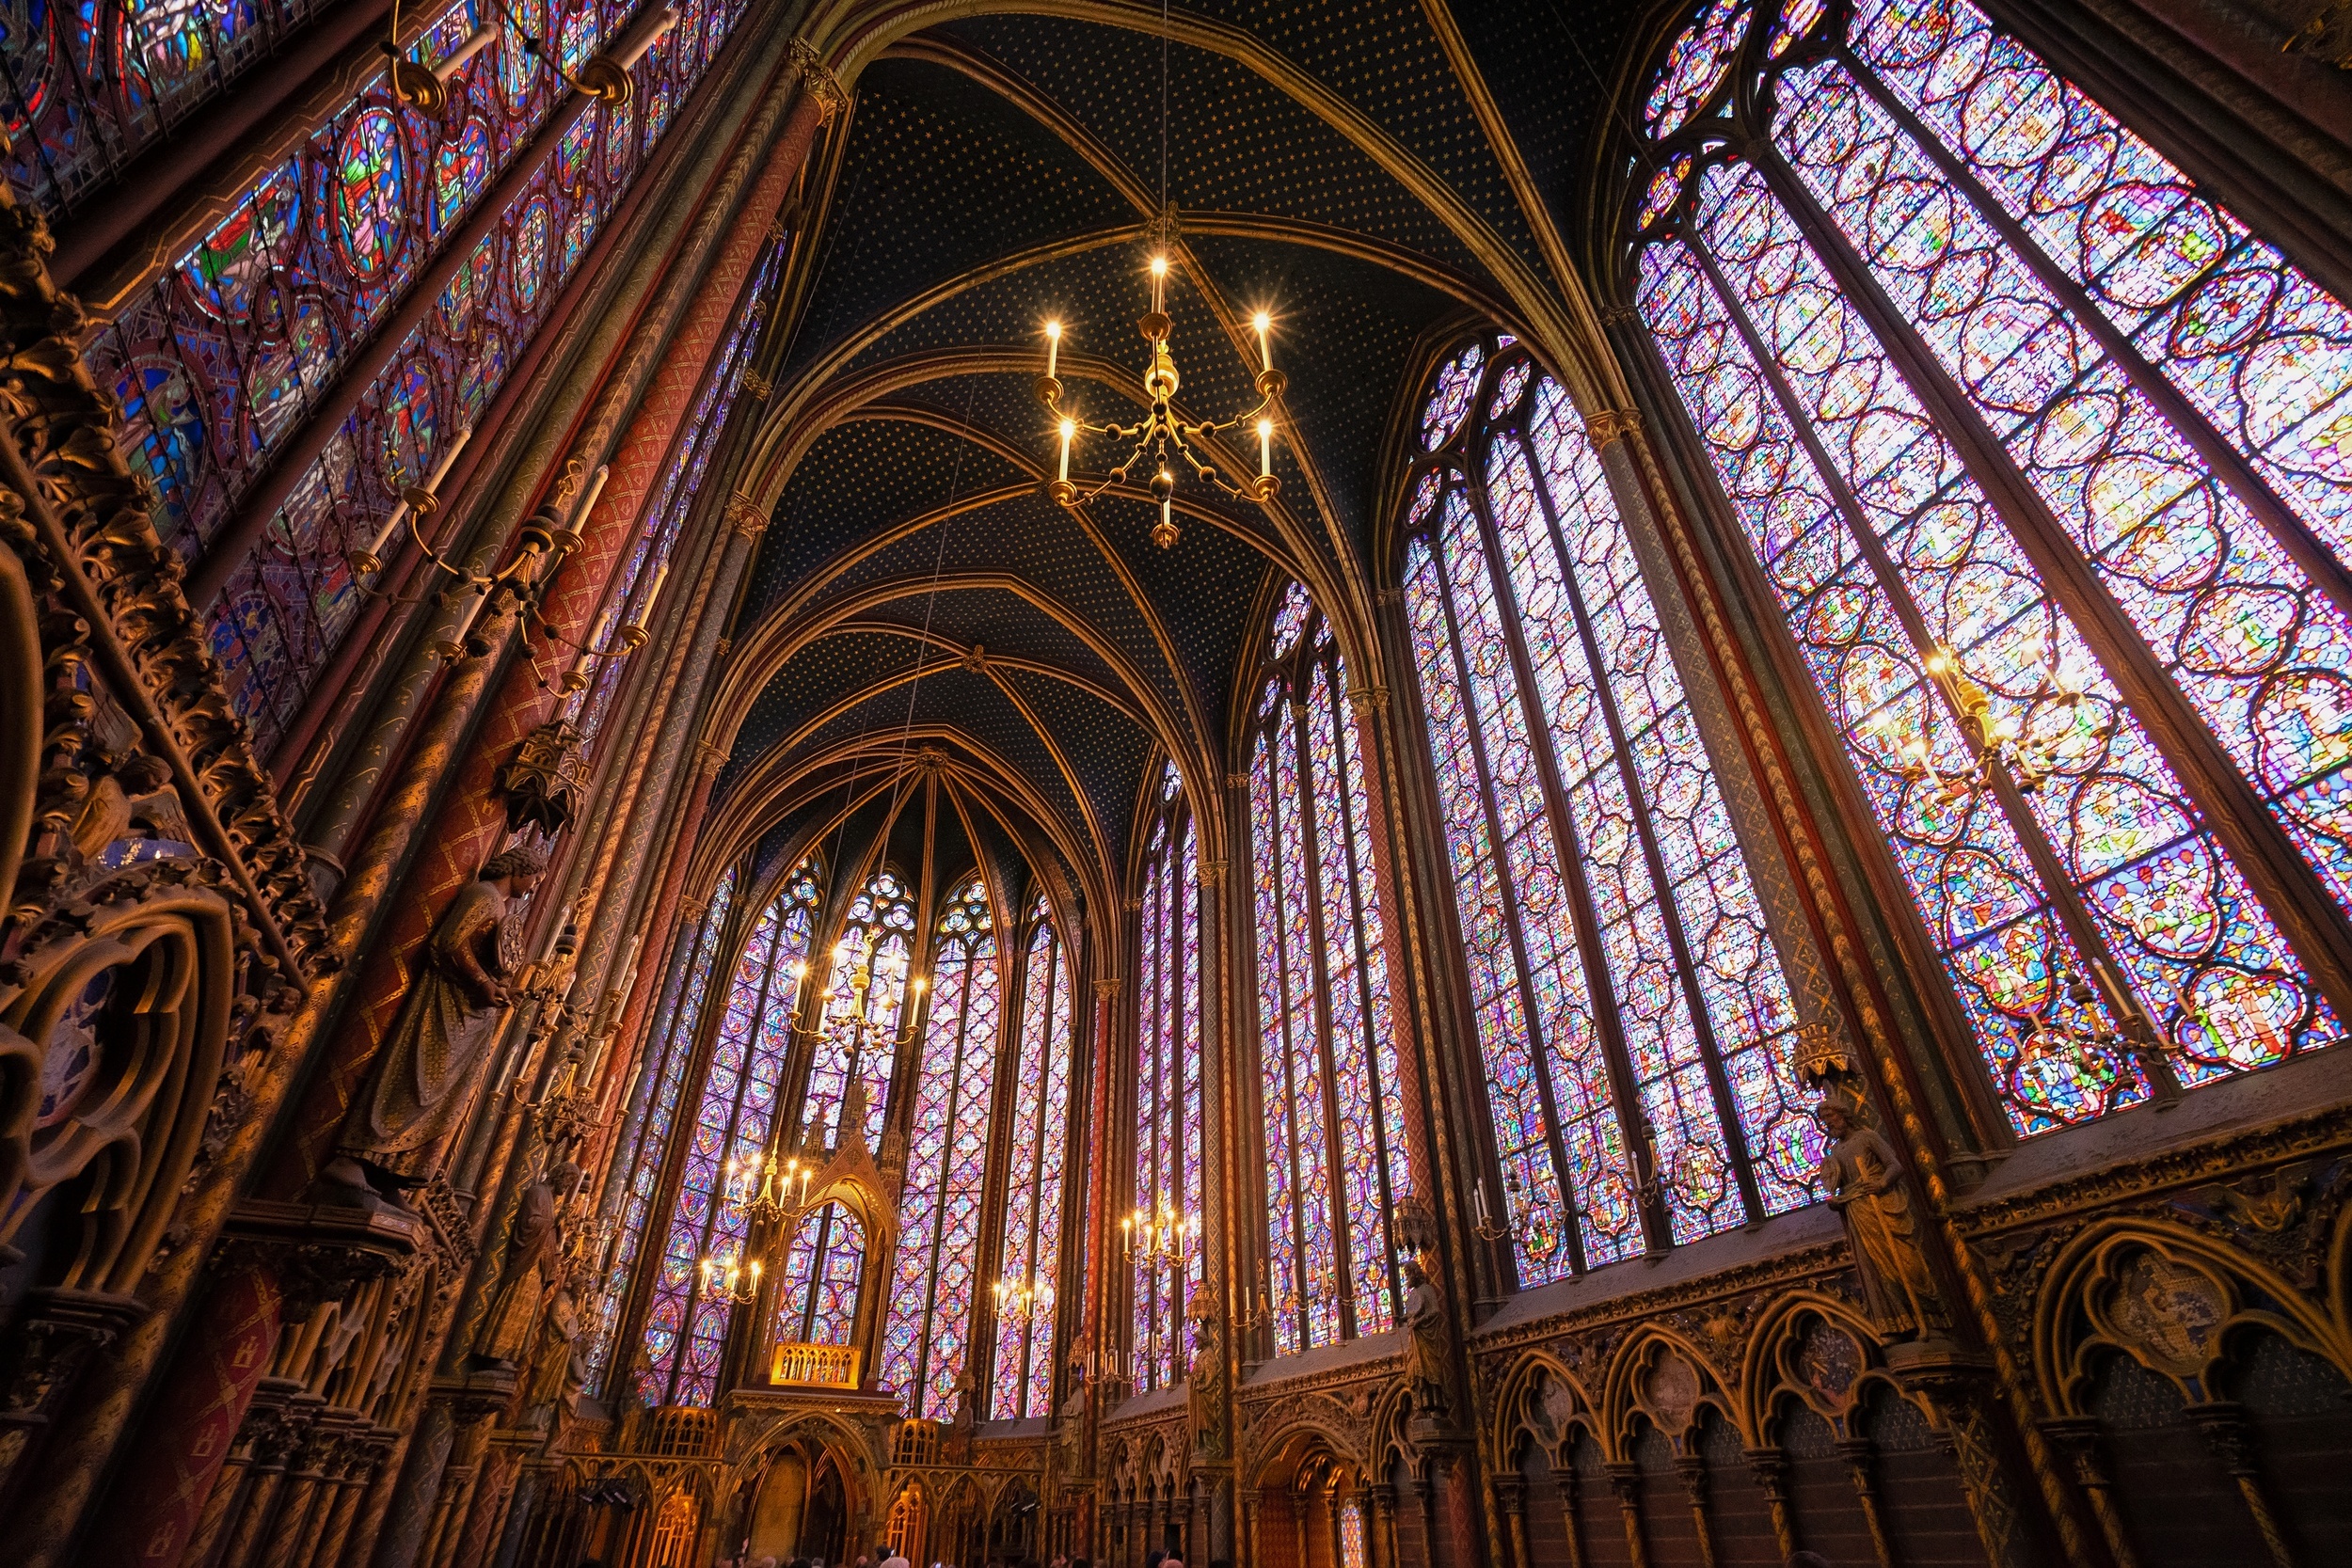 <p>This gothic-style royal chapel is a site to be seen but nowhere near as crowded as Notre Dame (when you could visit.) It’s ideally located on the same small island in the city as the more famous cathedral. </p><p><a href='https://www.msn.com/en-us/community/channel/vid-cj9pqbr0vn9in2b6ddcd8sfgpfq6x6utp44fssrv6mc2gtybw0us'>Did you enjoy this slideshow? Follow us on MSN to see more of our exclusive lifestyle content.</a></p>